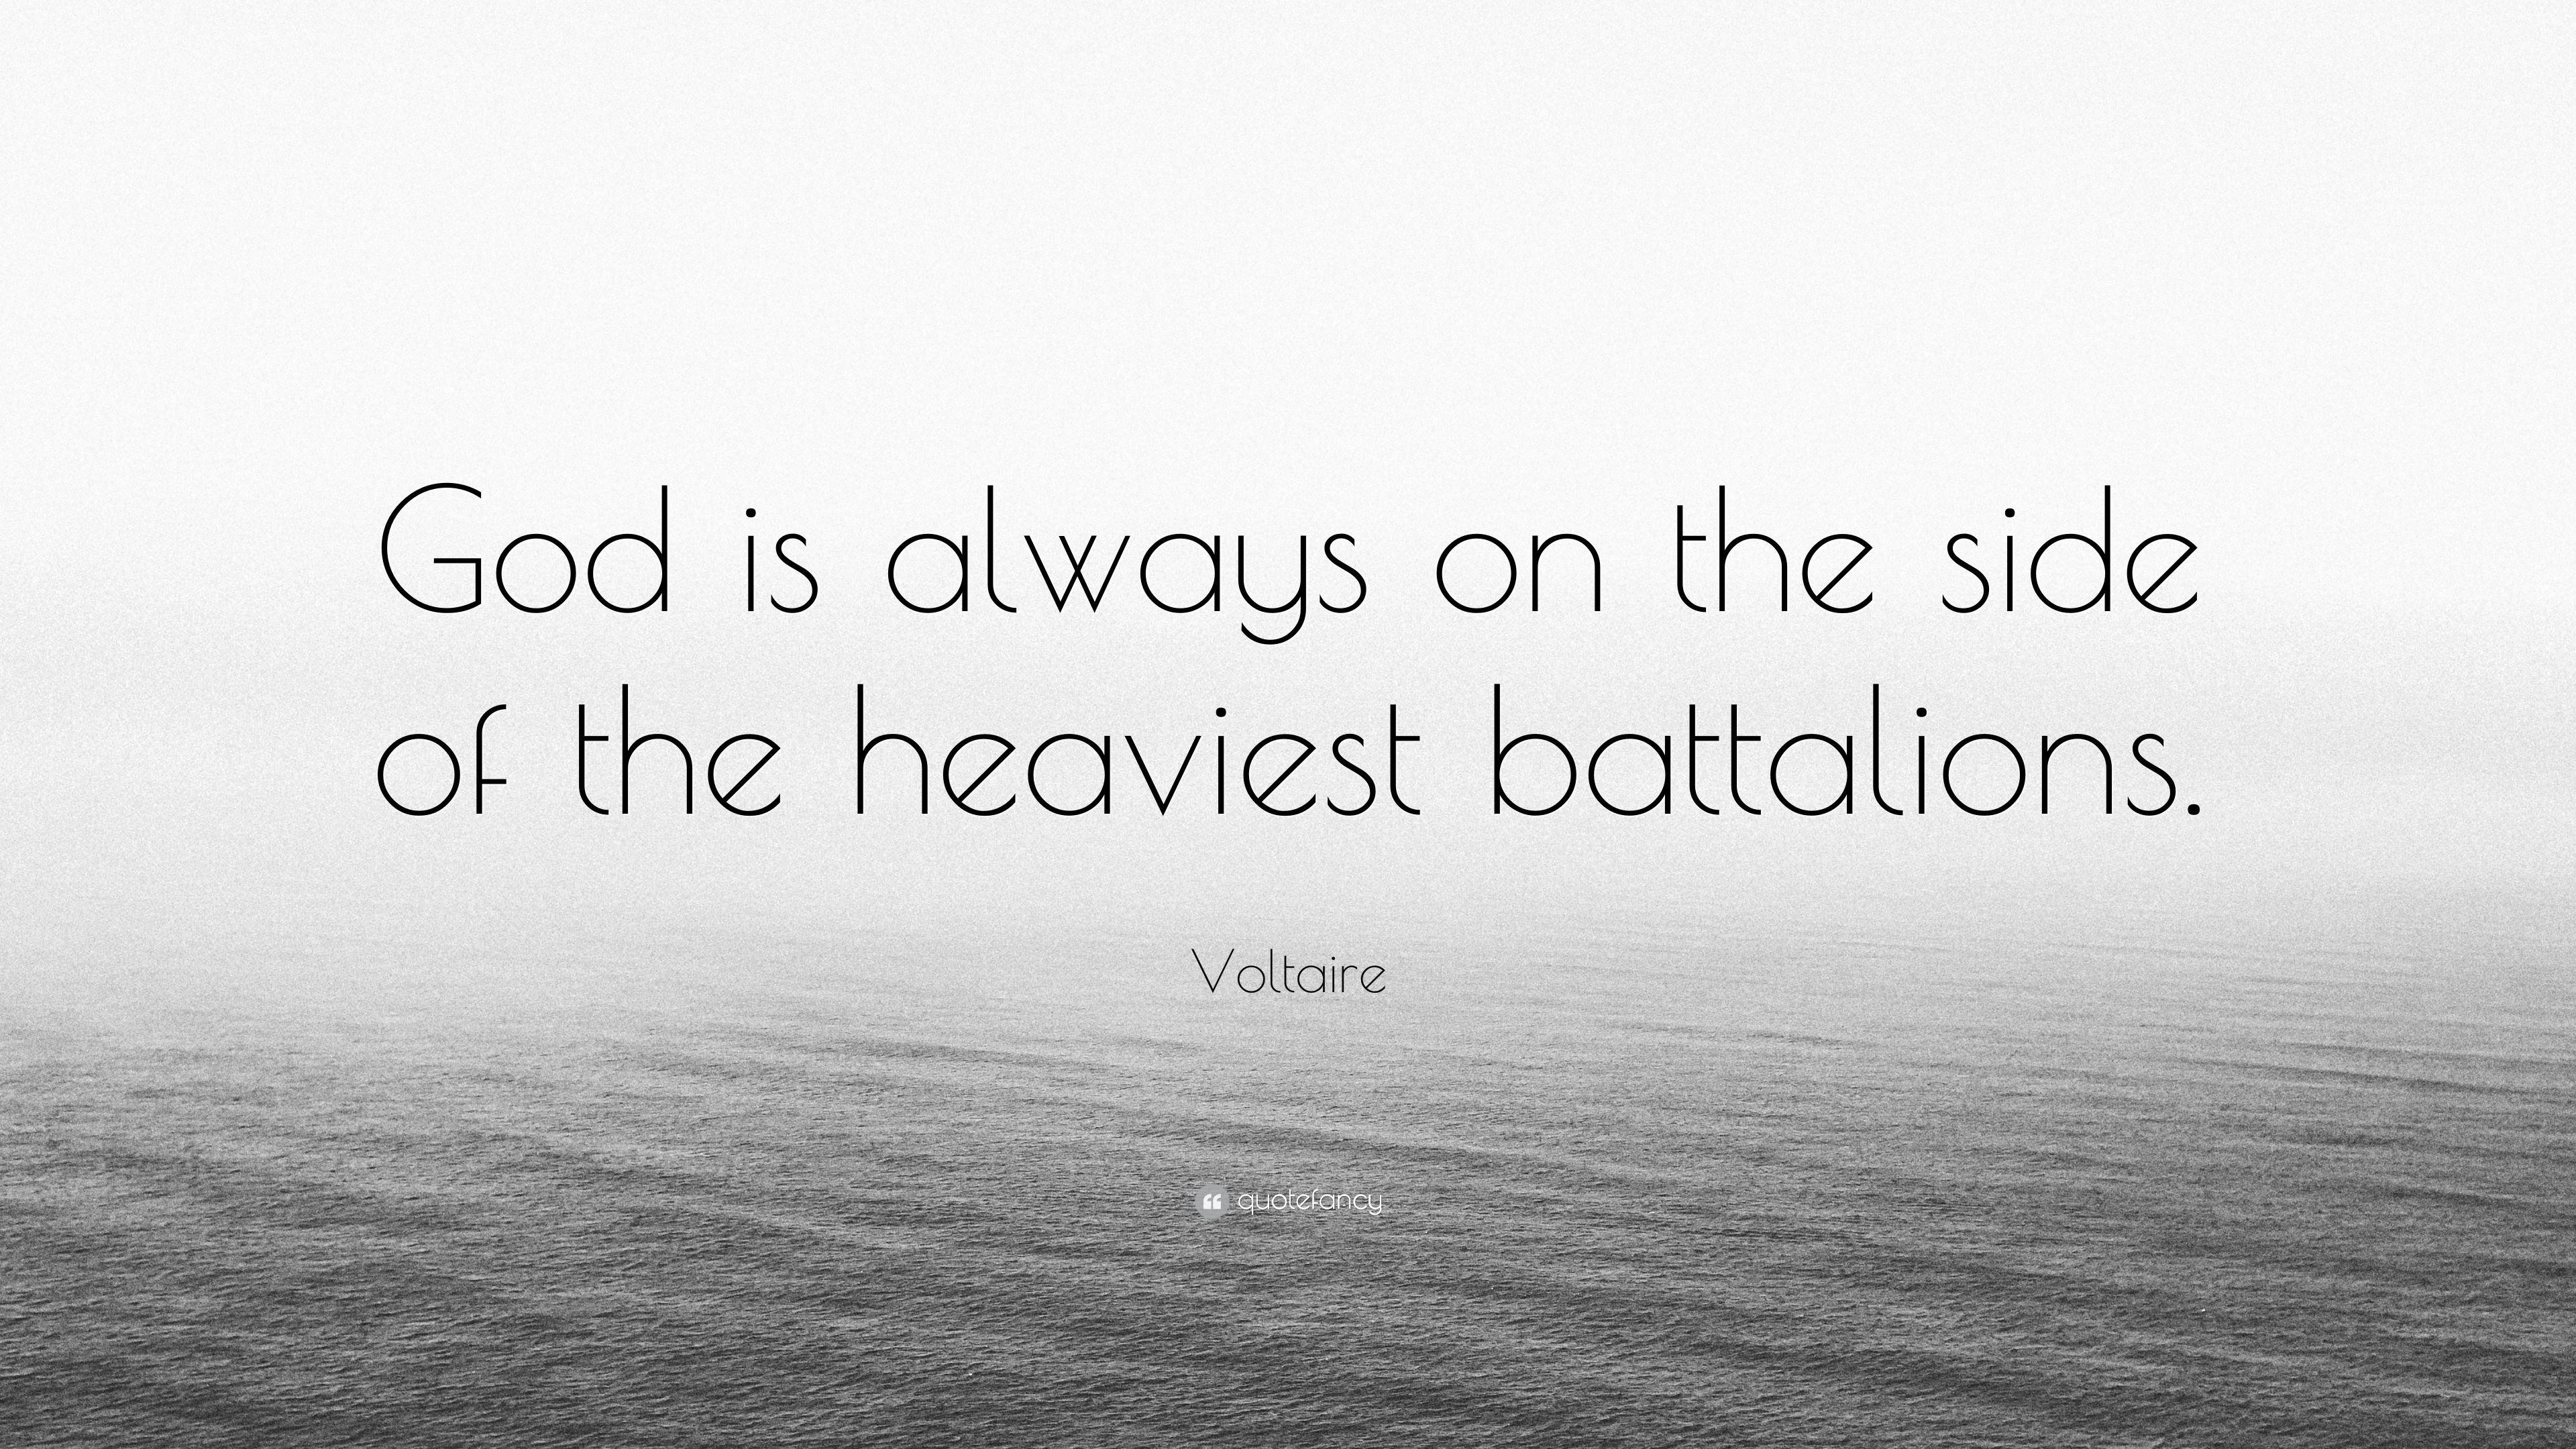 Voltaire Quote: “God is always on the side of the heaviest